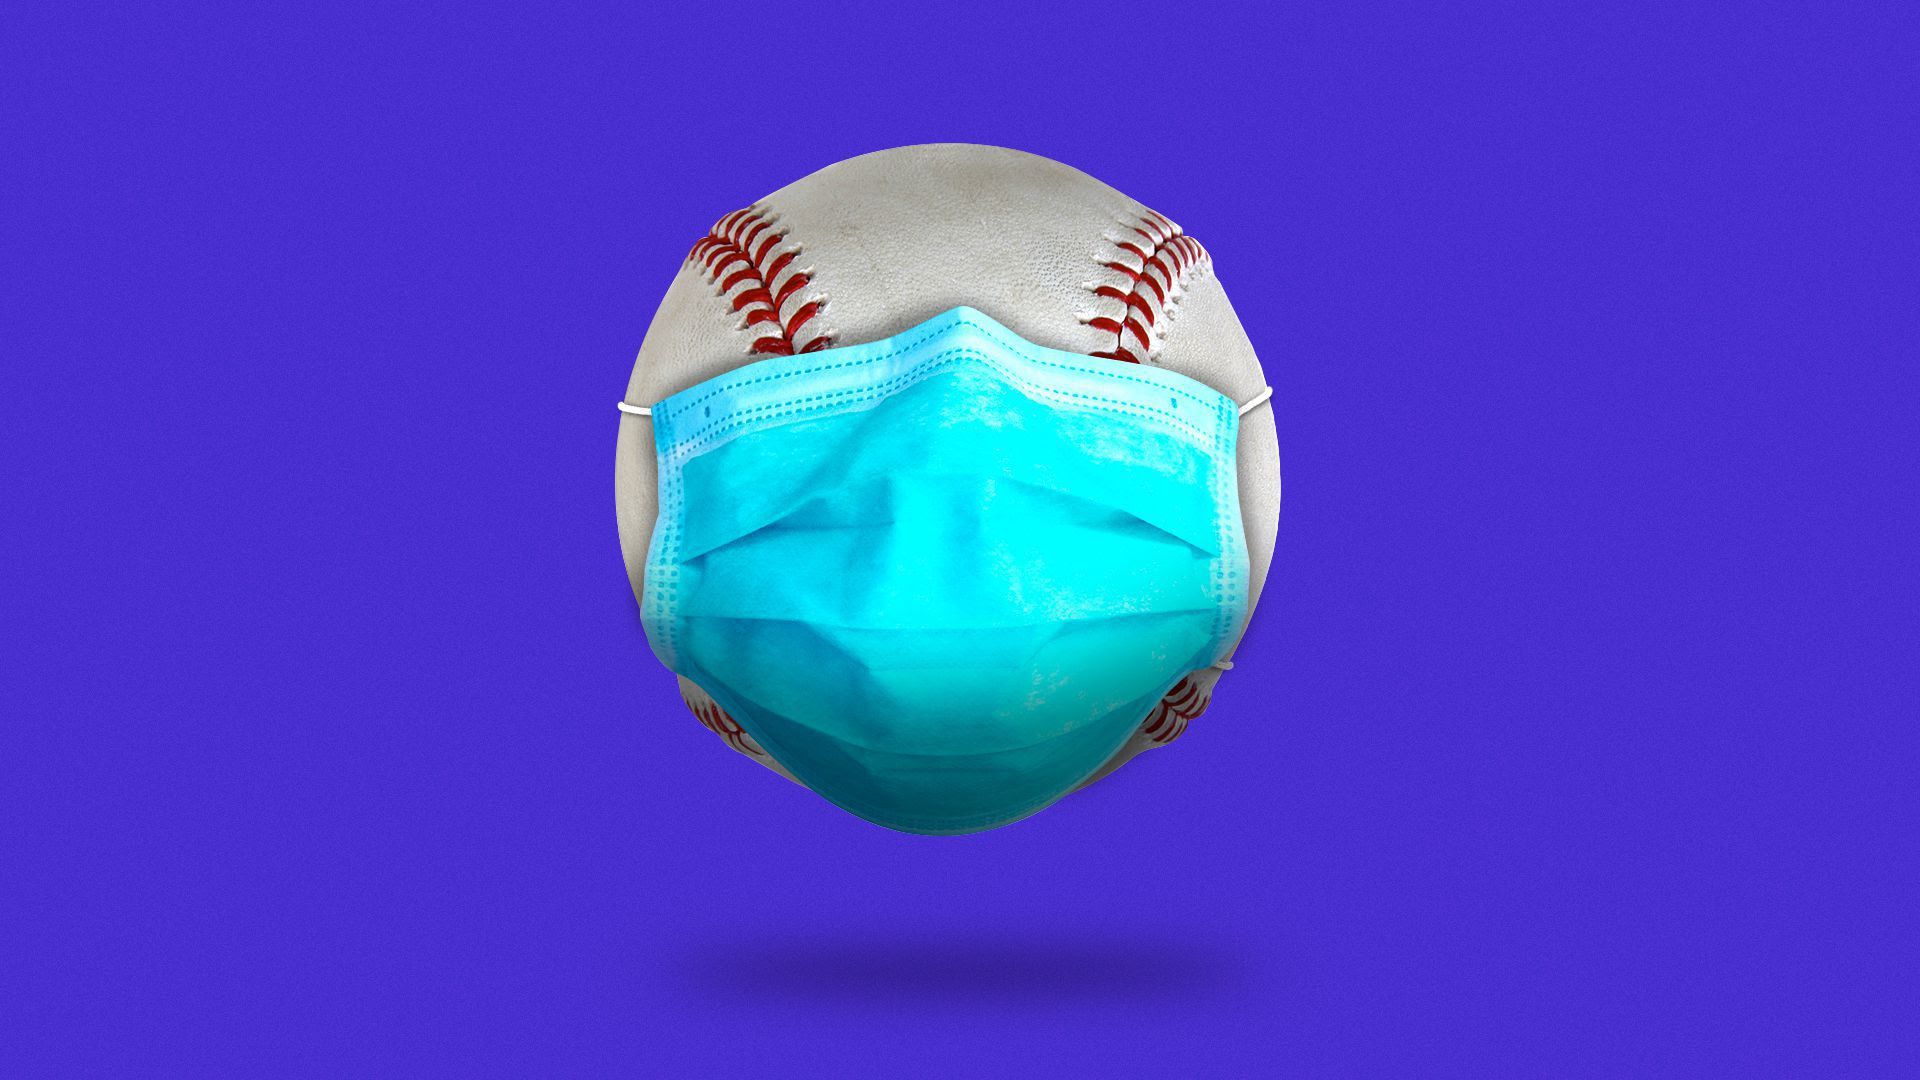 An illustration of a baseball with a face mask on.